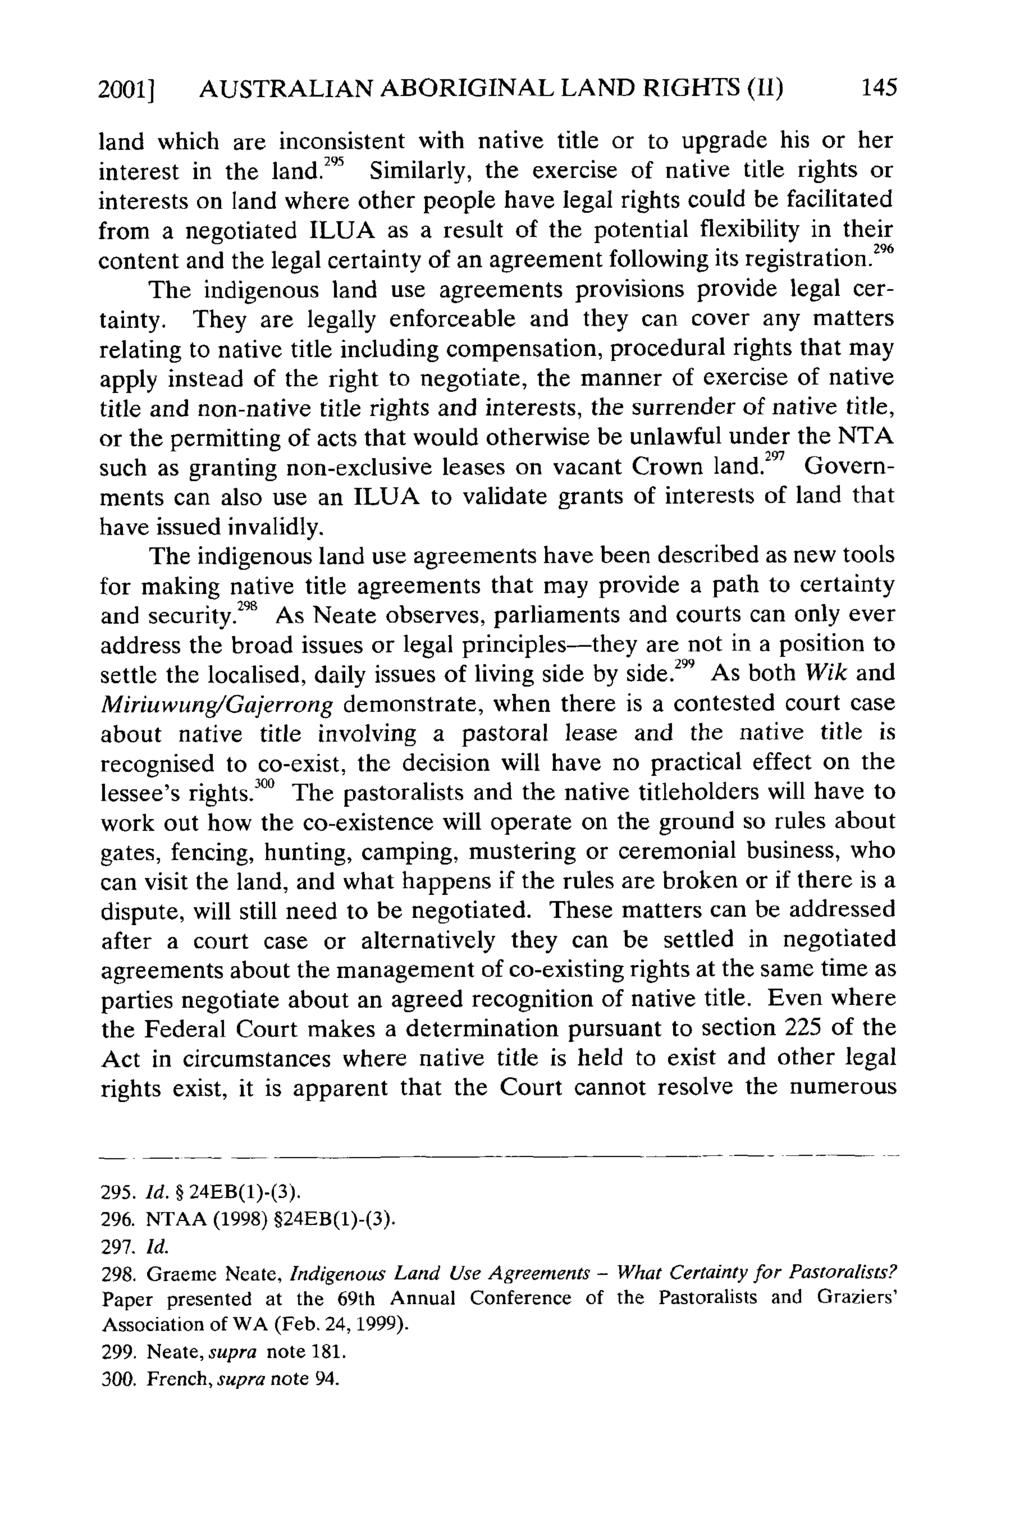 2001] AUSTRALIAN ABORIGINAL LAND RIGHTS (II) 145 land which are inconsistent with native title or to upgrade his or her 295 interest in the land.